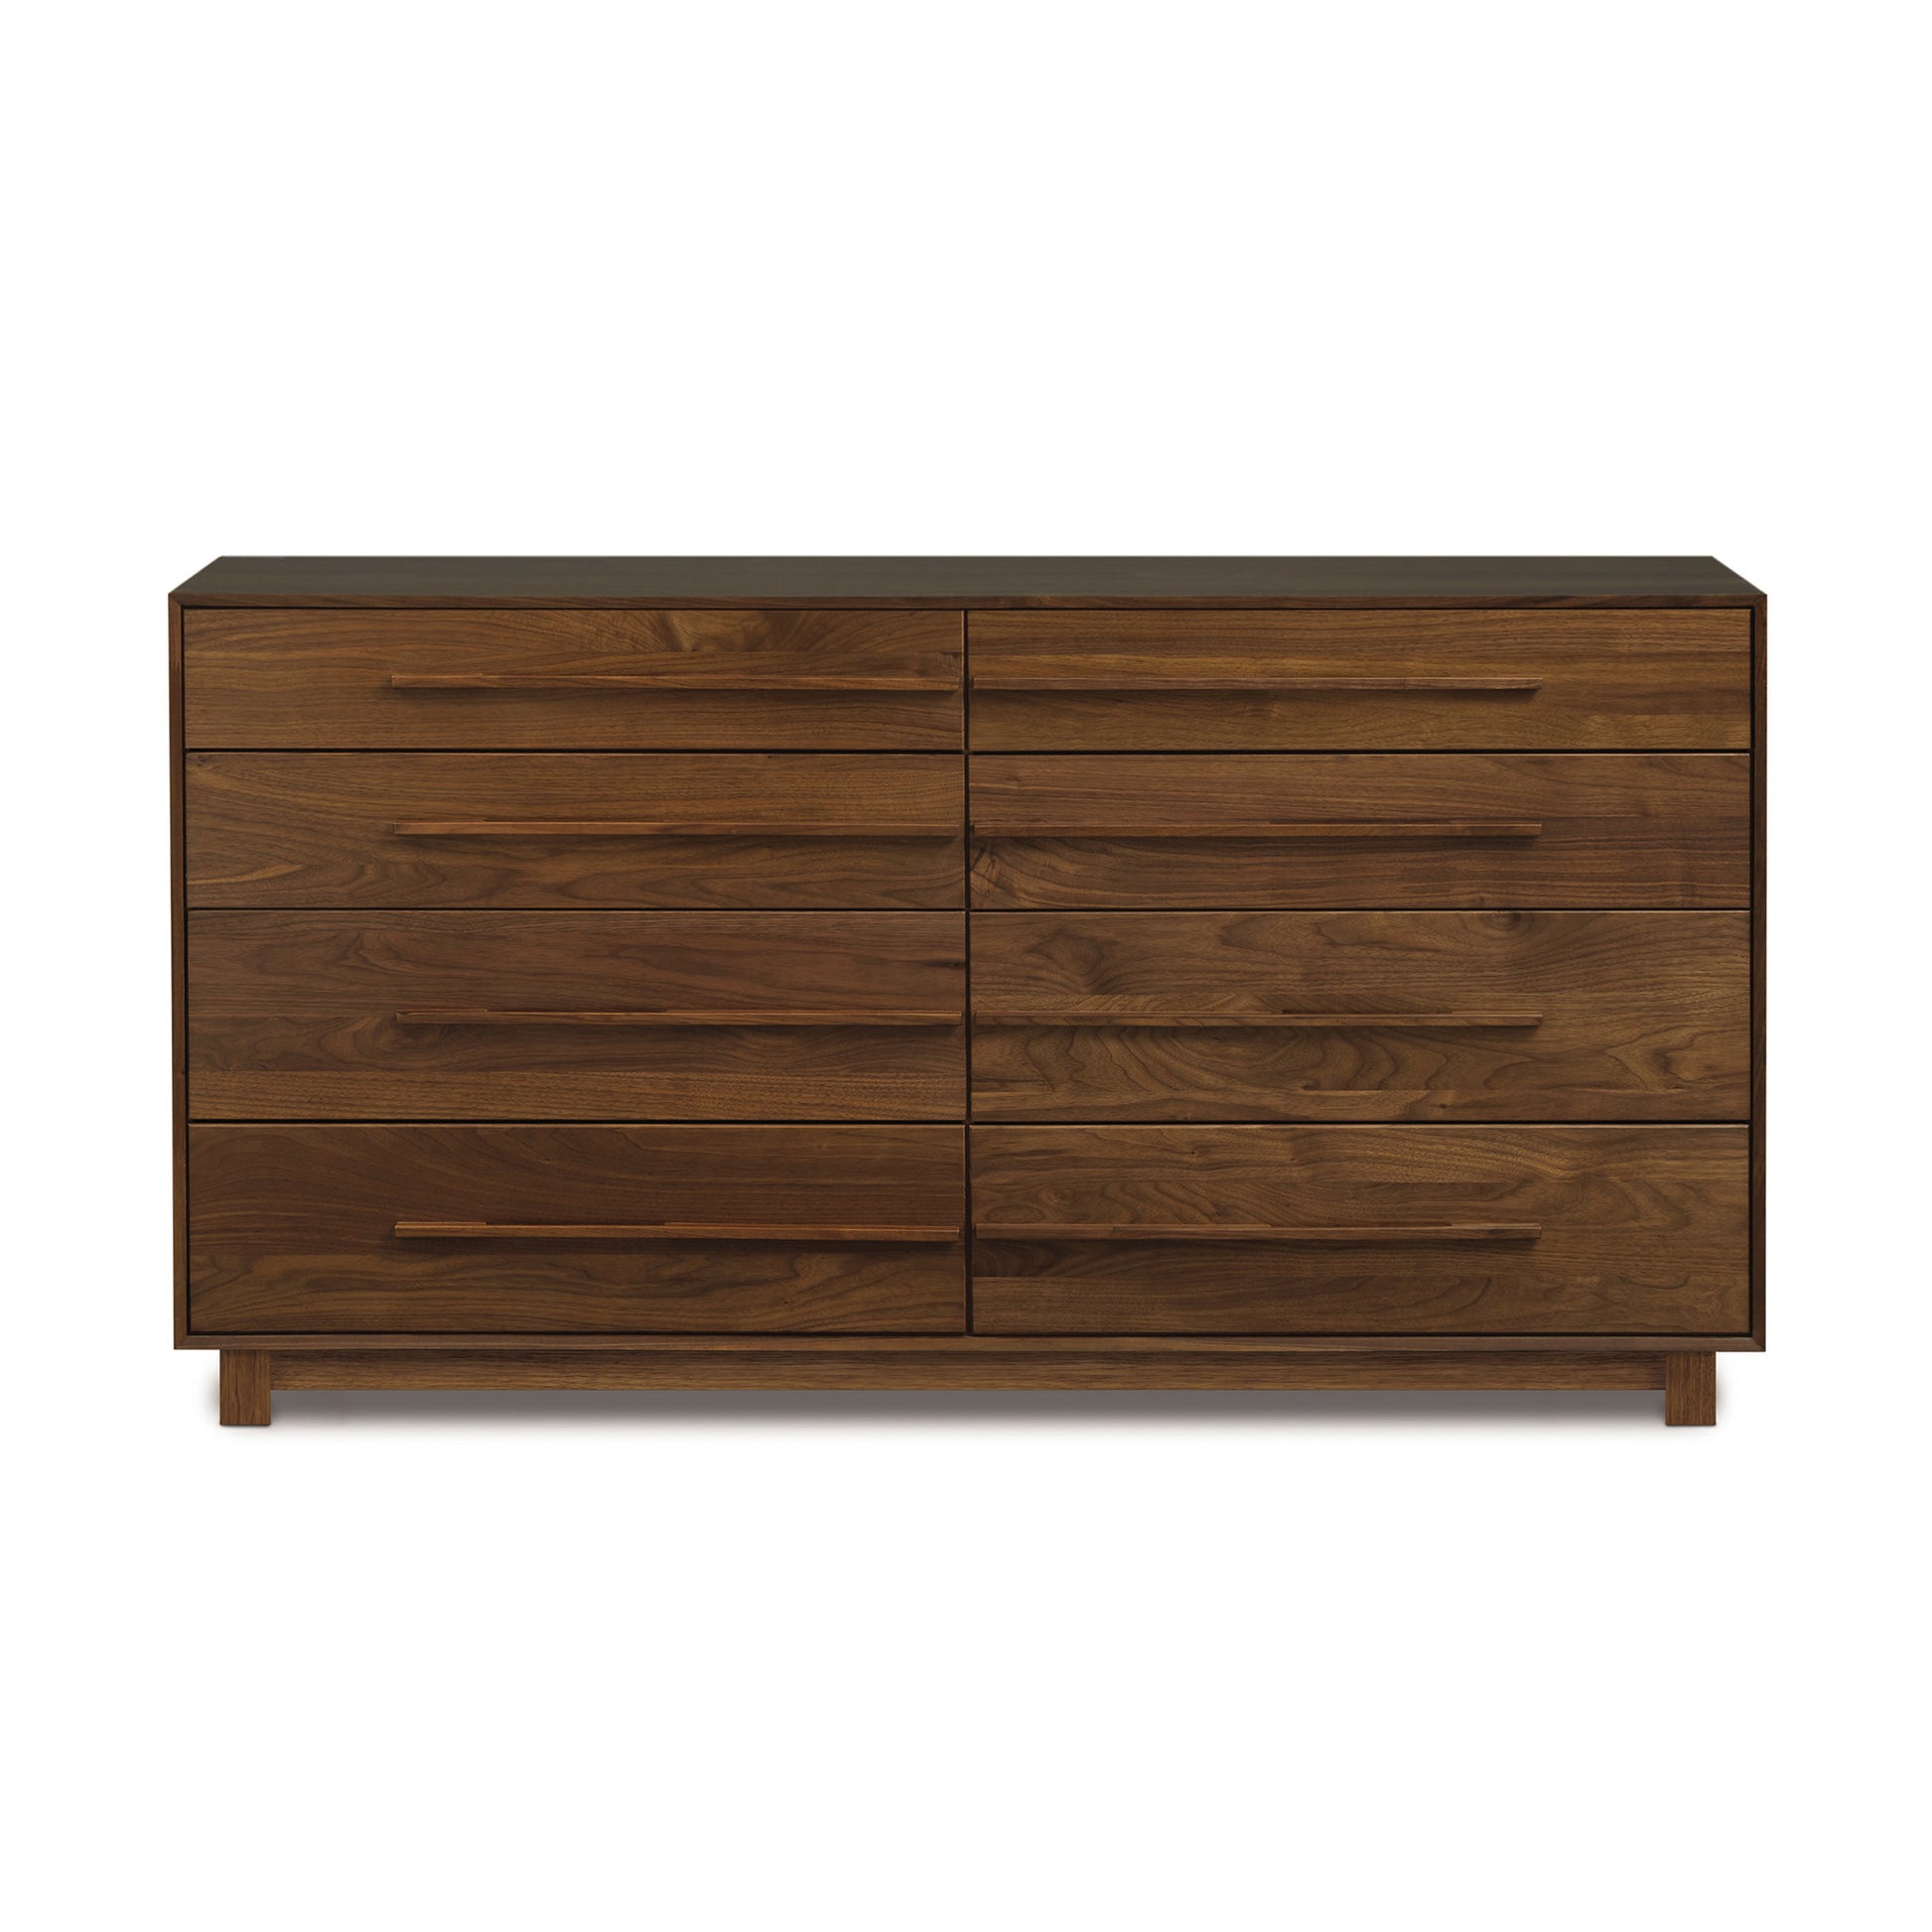 Contemporary bedroom furniture: Copeland Furniture's Sloane 8-Drawer Dresser crafted from sustainably harvested wood, isolated on a white background.